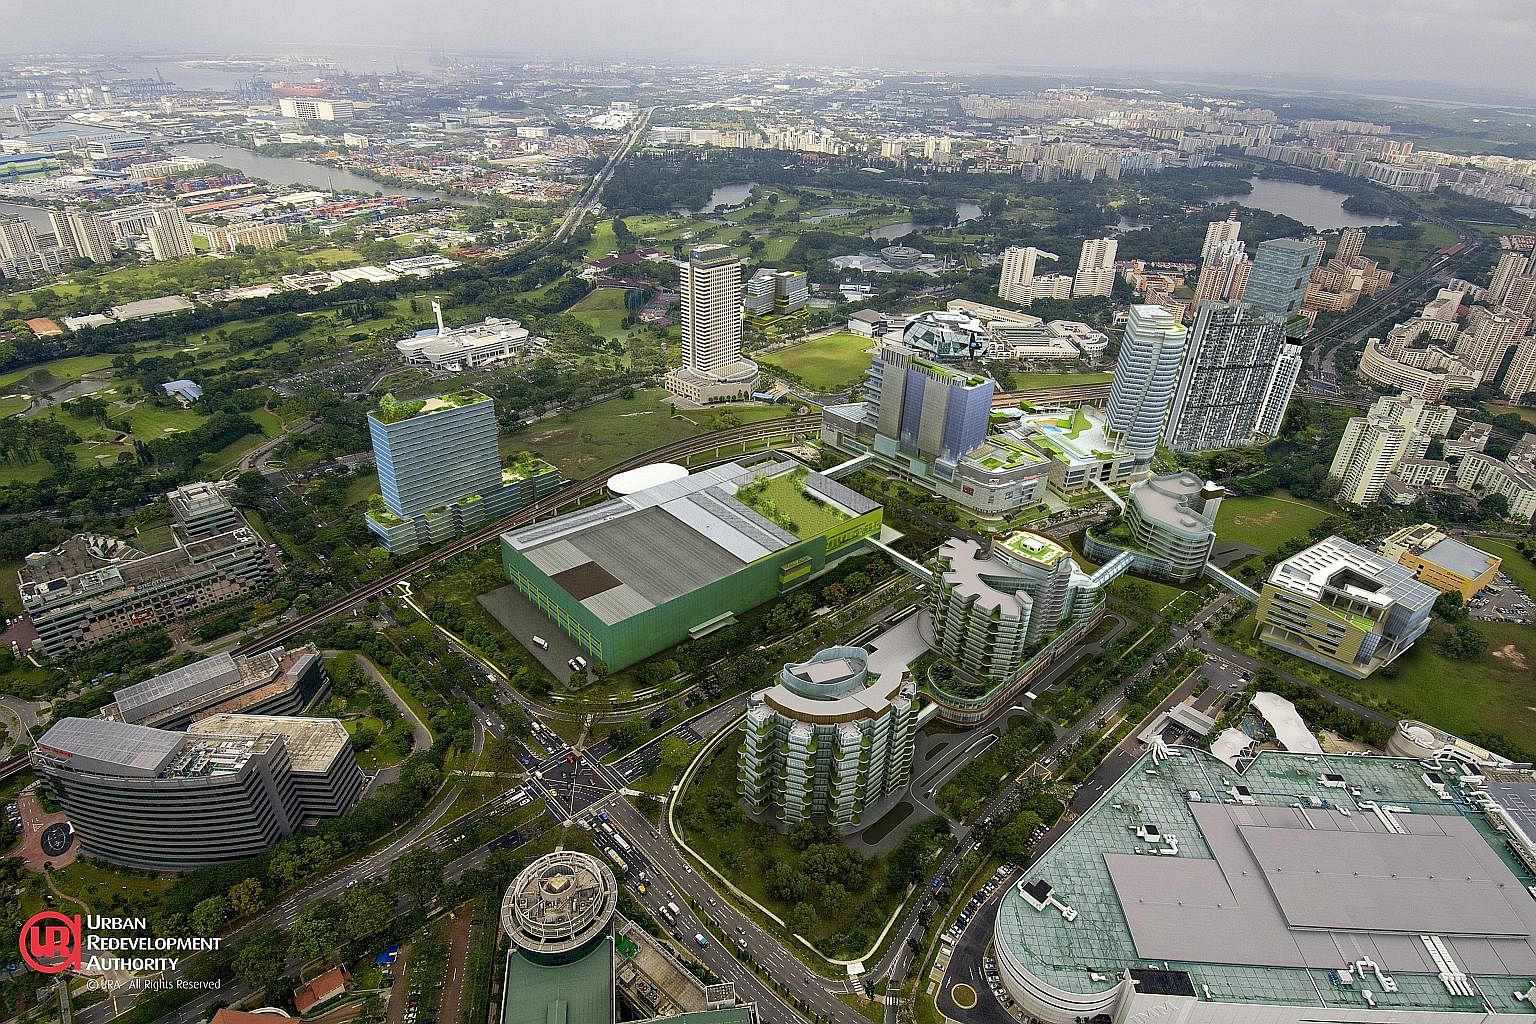 An artist's impression of the Jurong Lake District, where most of Singapore's cutting-edge smart city solutions are currently being tested. More than 1,000 data sensors are being deployed there in sustainability, urban mobility, and improving sensing